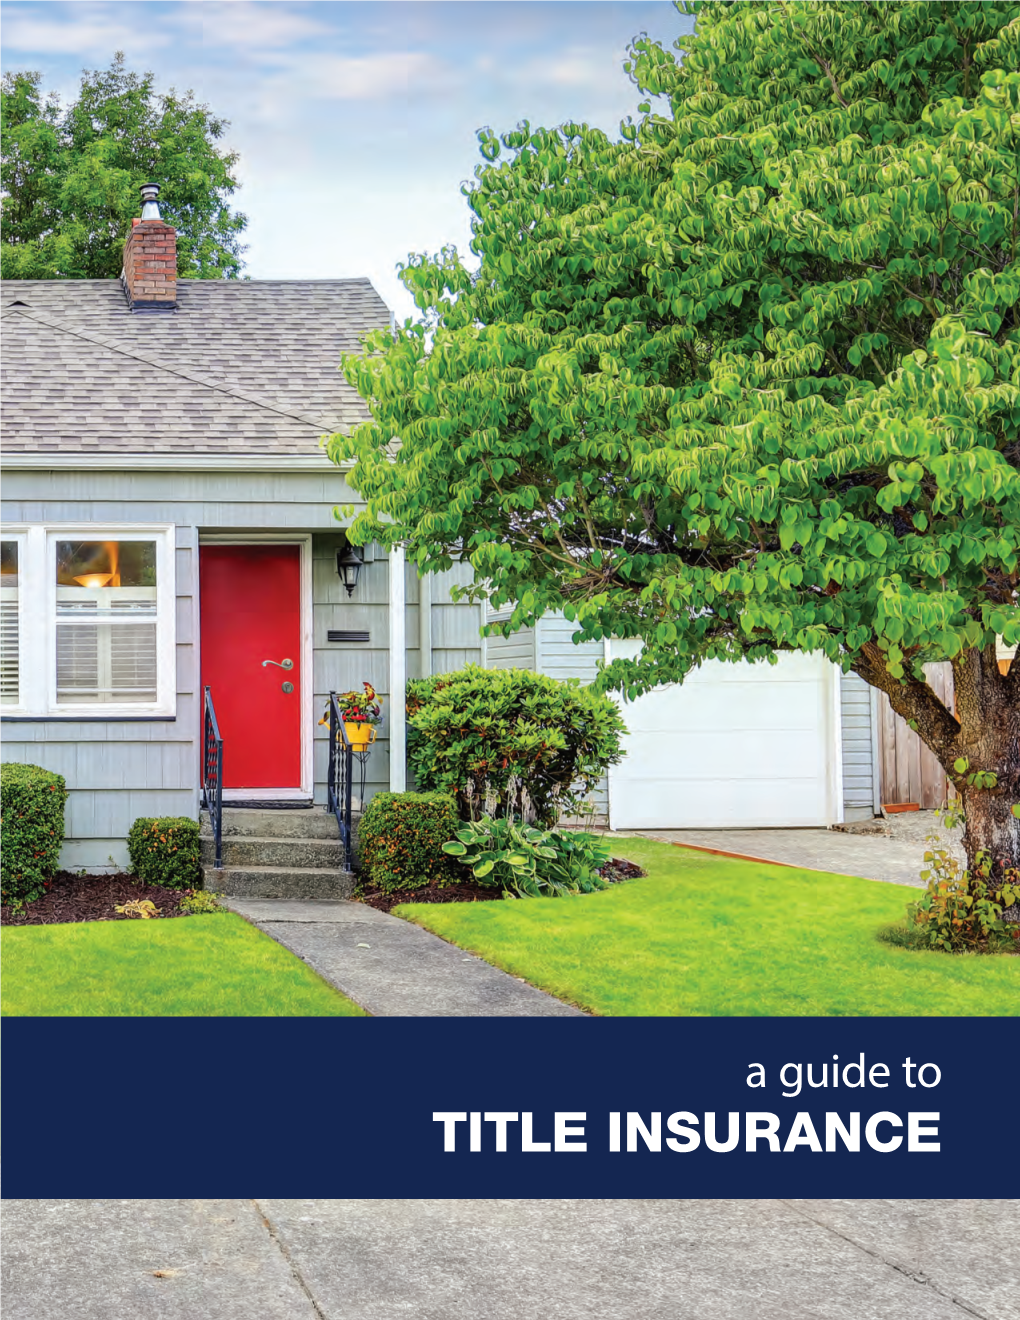 A Guide to TITLE INSURANCE TABLE of CONTENTS